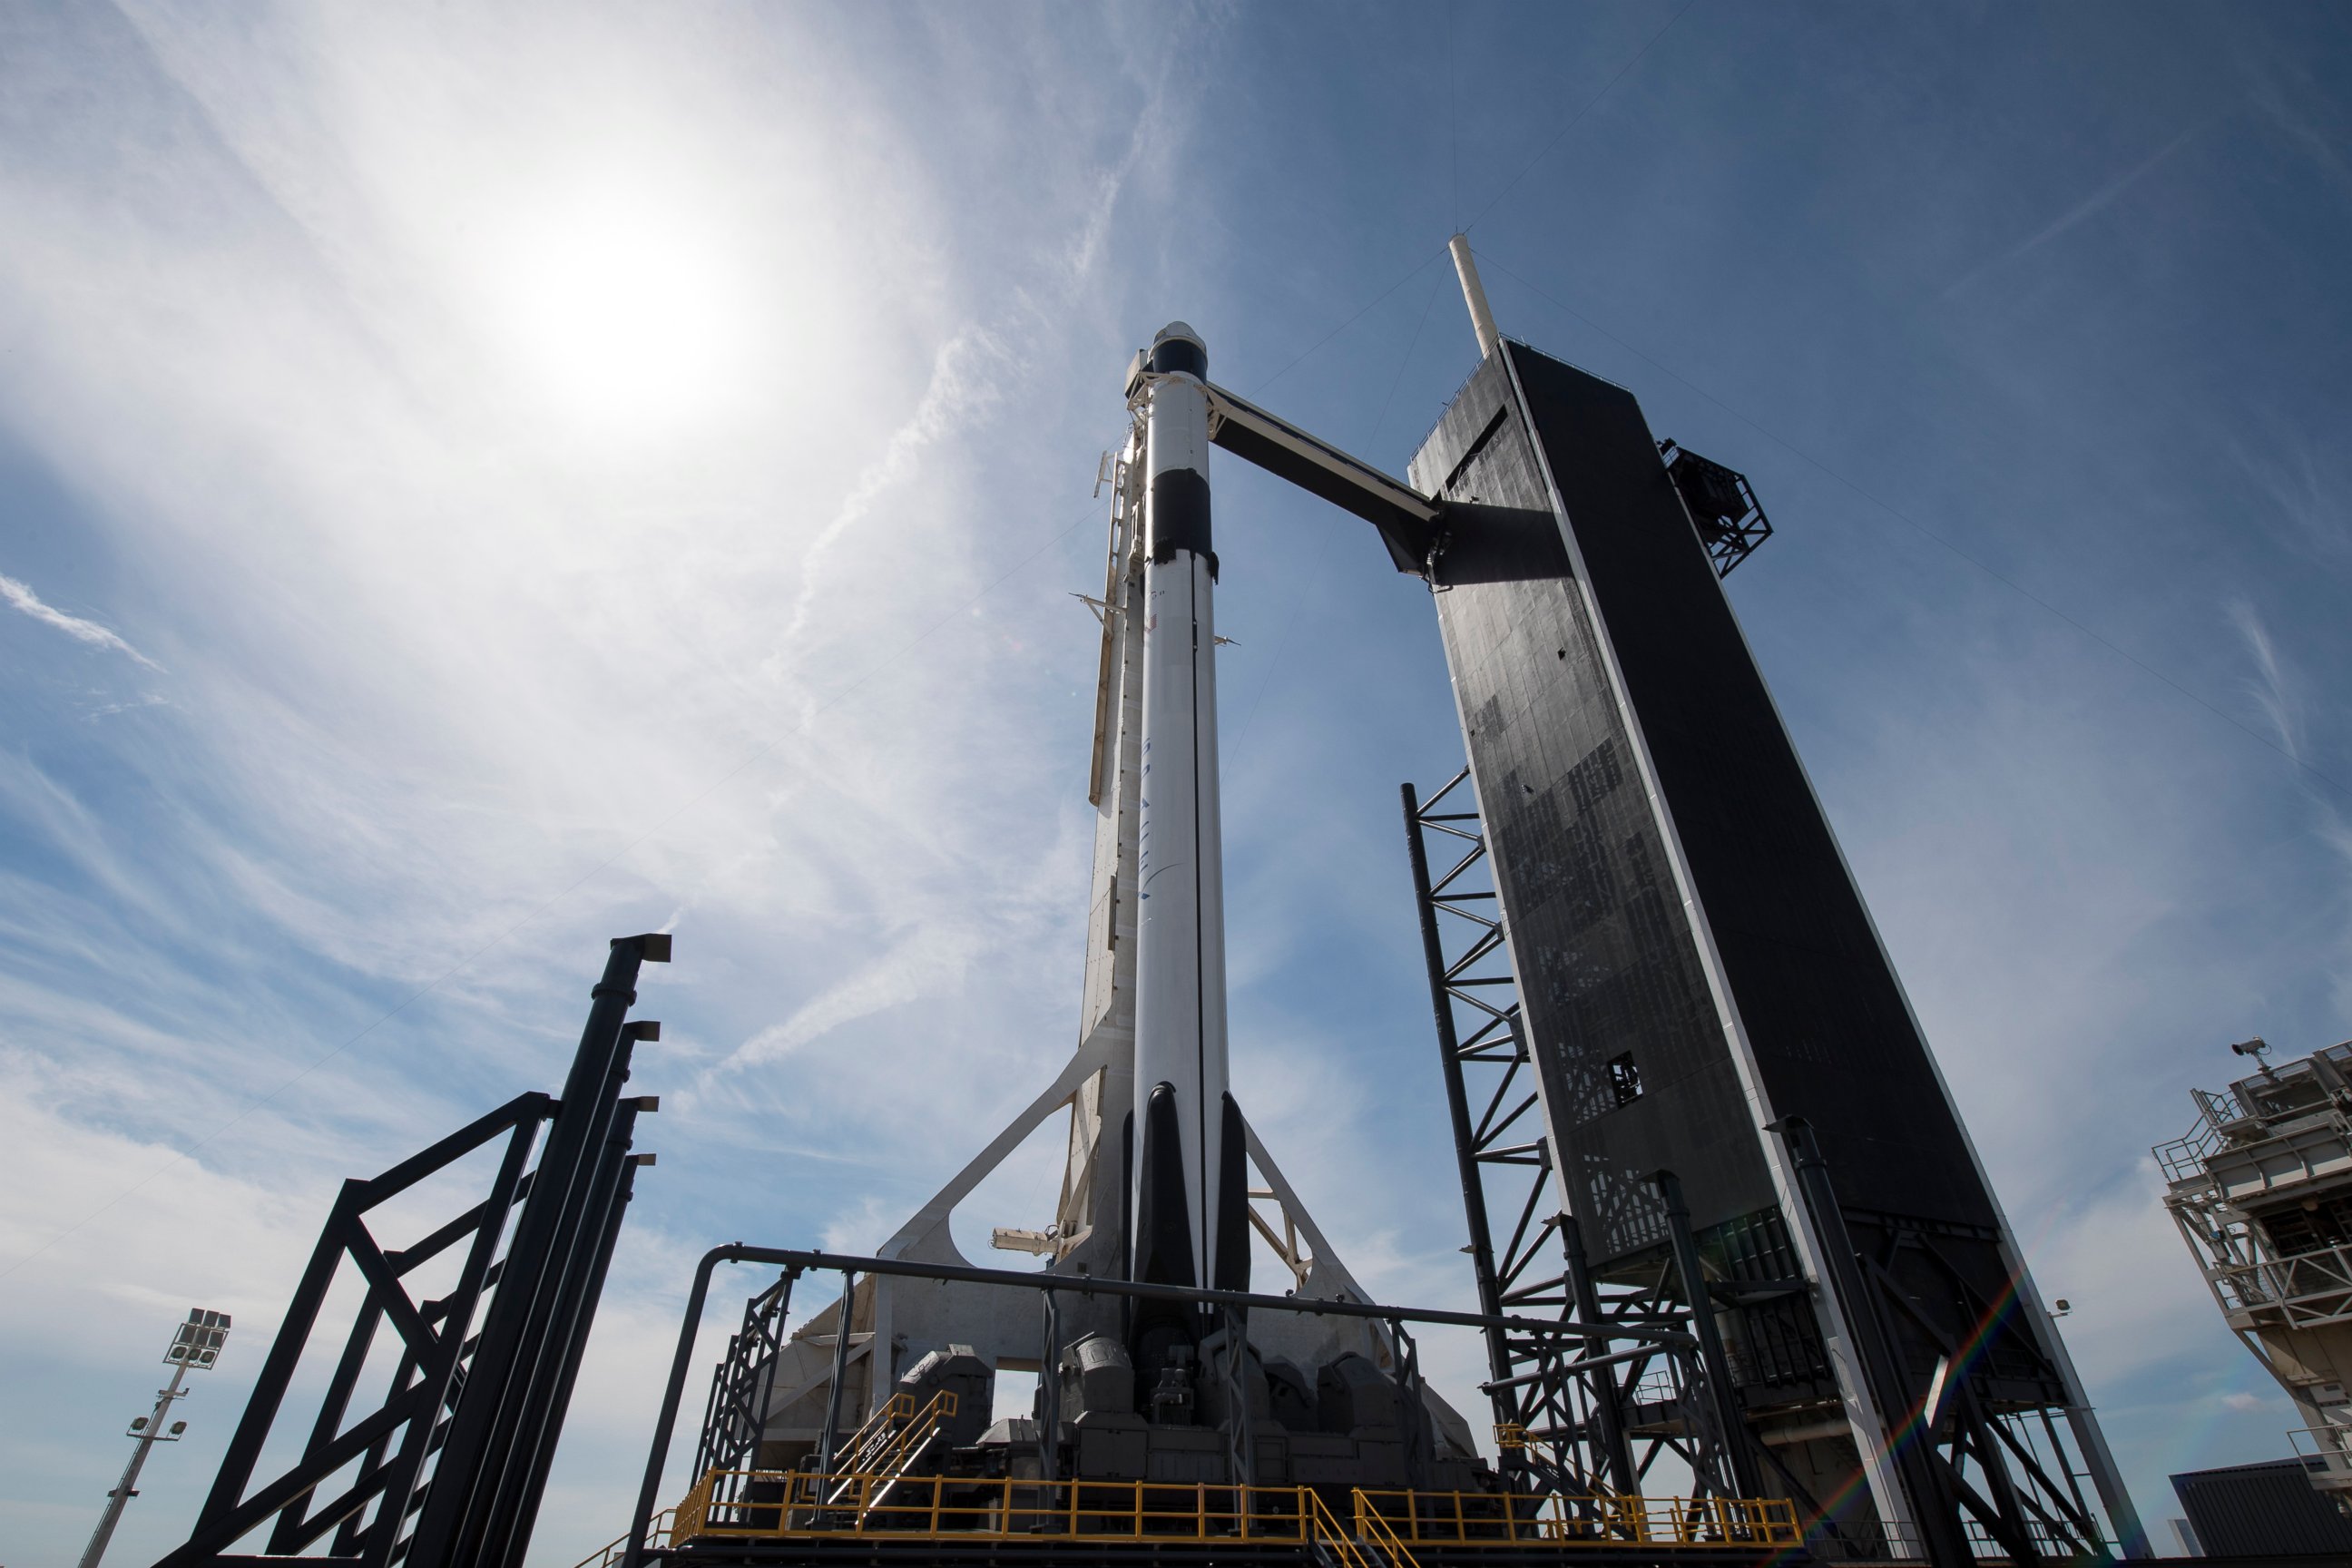 PHOTO: In this image released by NASA, a Falcon 9 SpaceX rocket, ready for launch, sits on pad 39A at the Kennedy Space Center in Cape Canaveral, Florida, Friday, March 1, 2019. It successfully launched early Saturday morning.